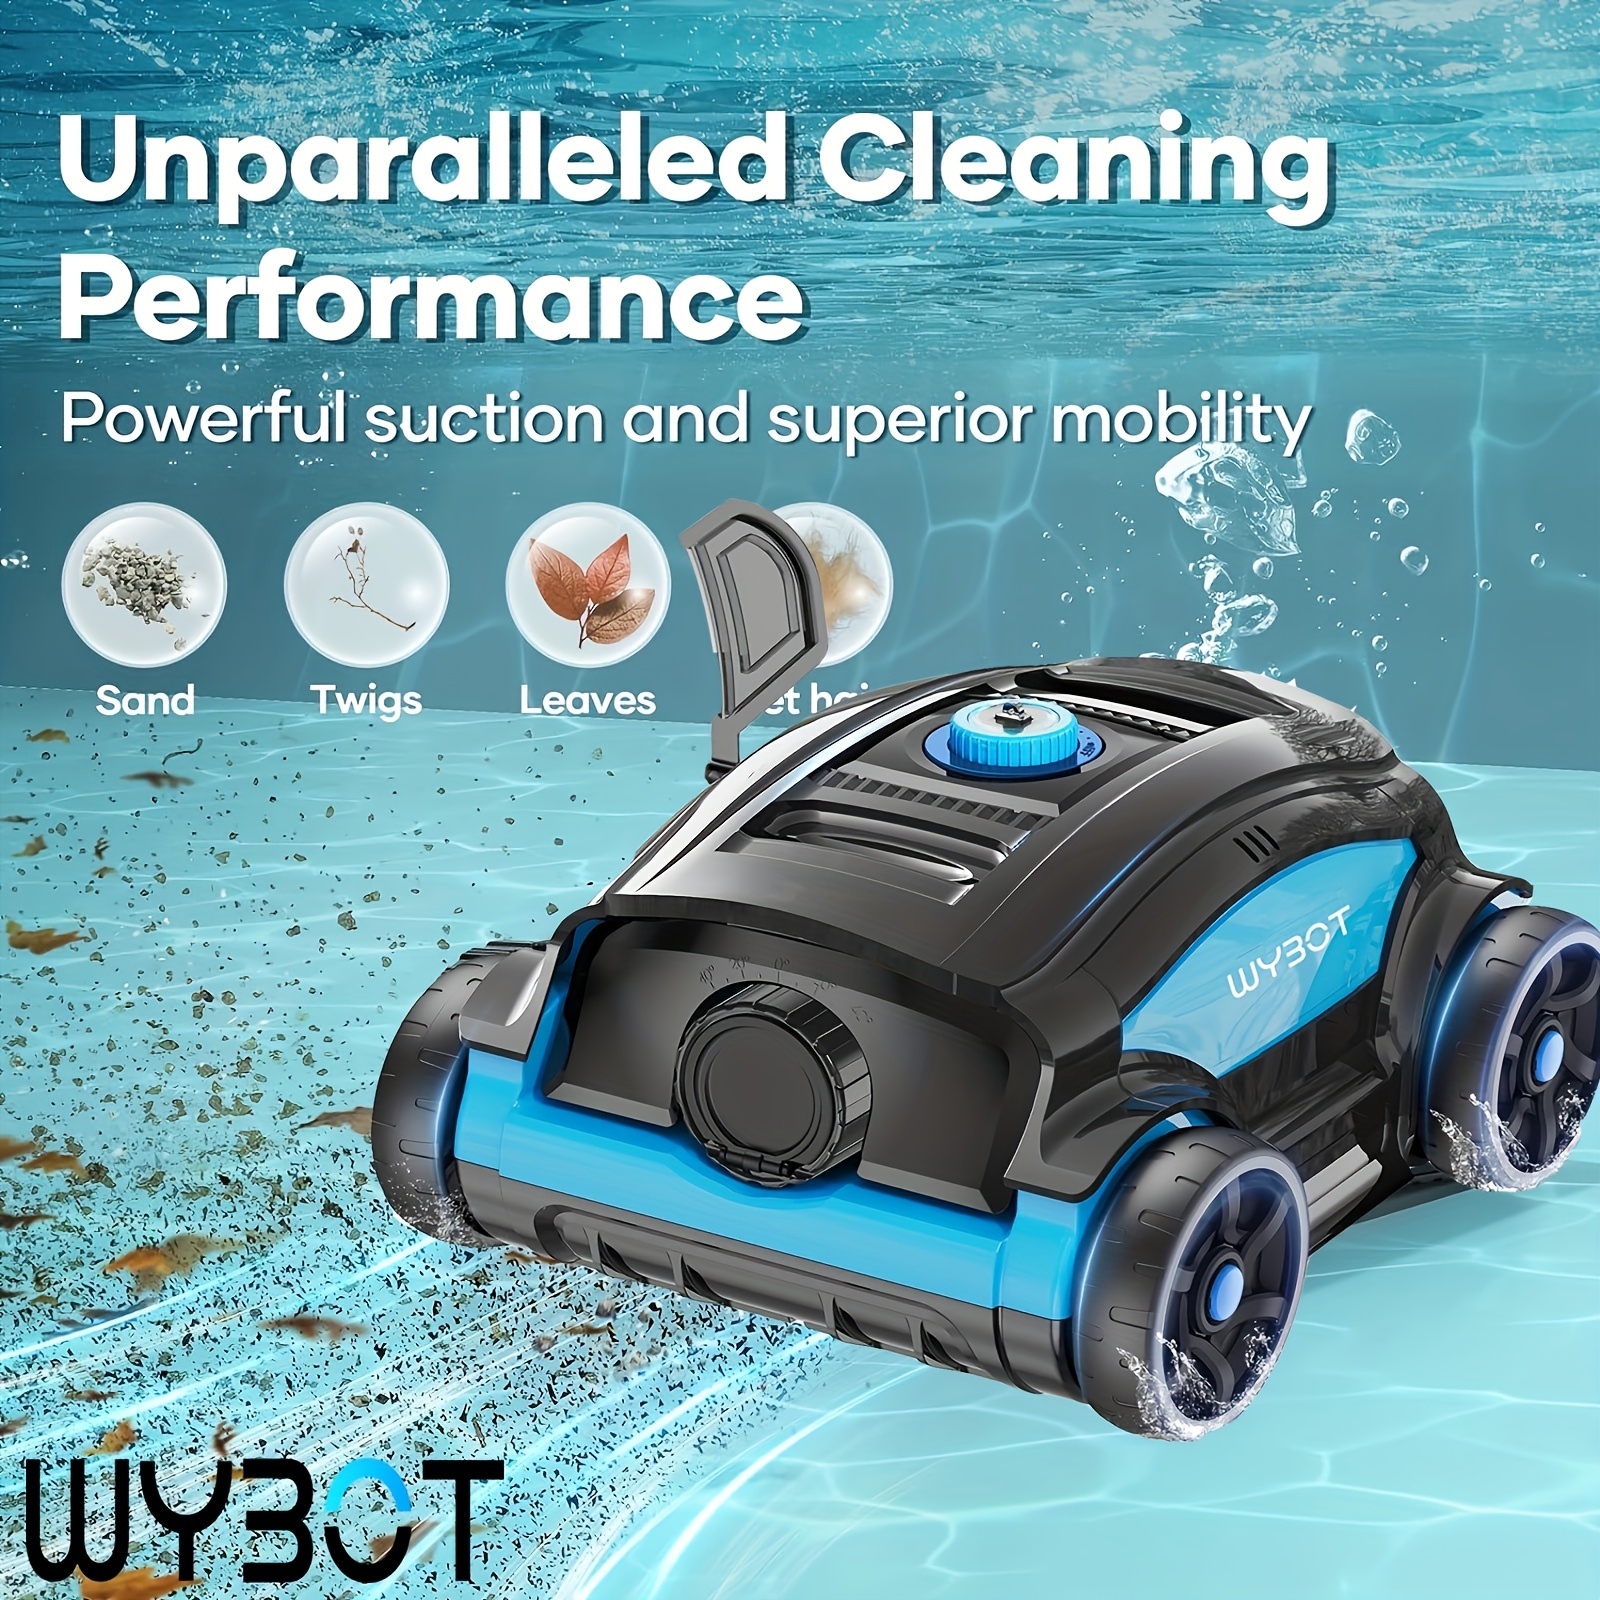 

Wybot Blue Robot Pool Cleaner - Easy Cordless Cleaning, 130 Minute Power Vacuum, Automatic Parking, Lightweight, Suitable For 70 Foot/1300 Square Foot Swimming Pools - Advanced Automatic Technology